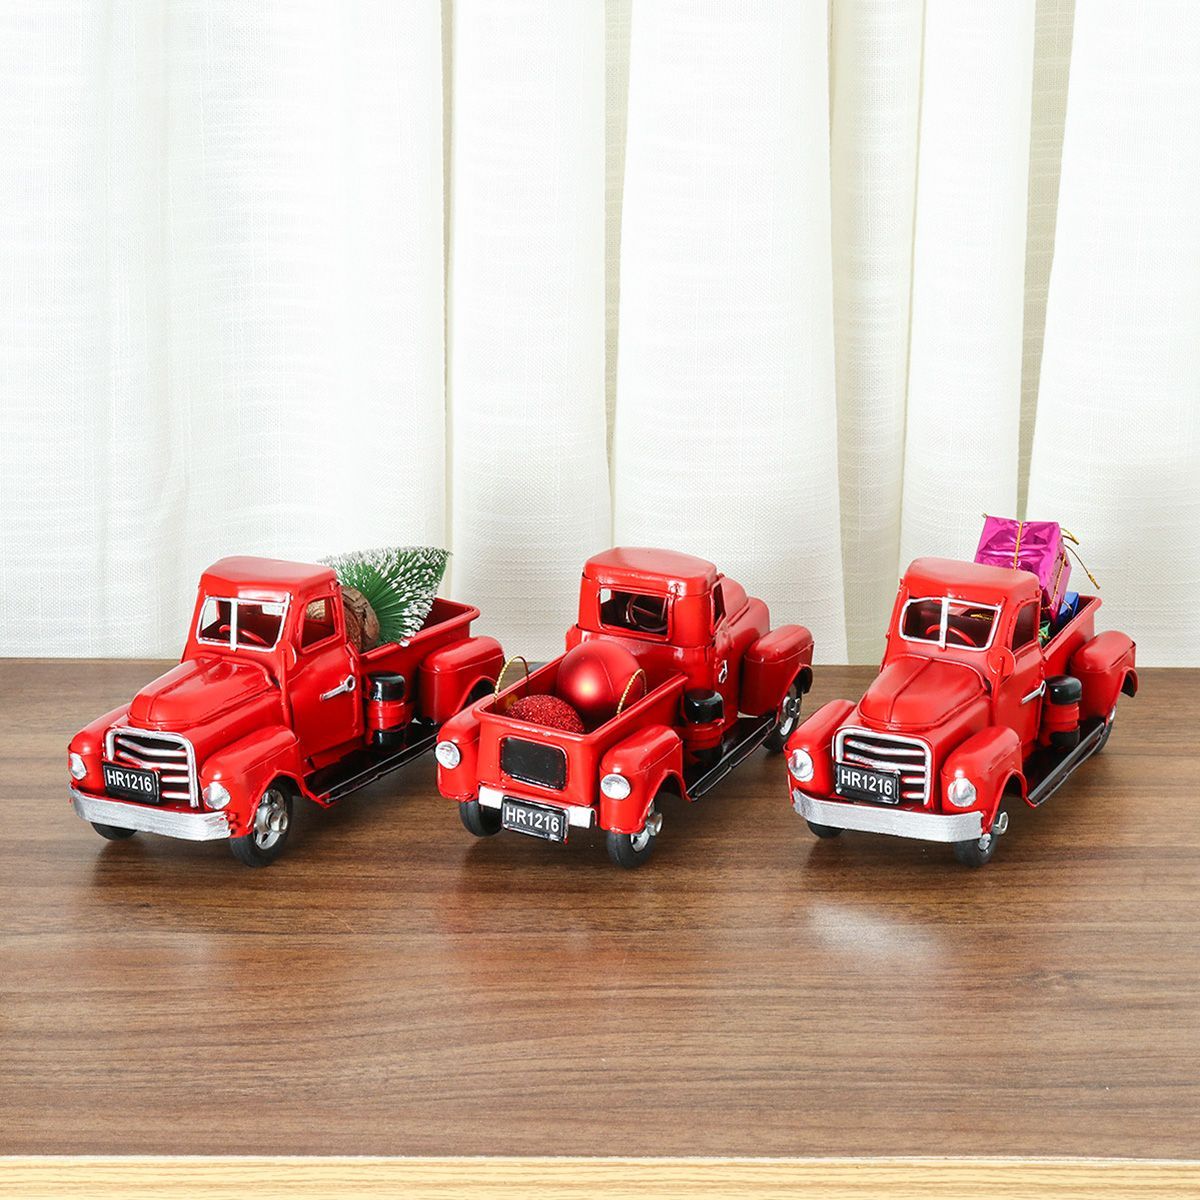 Christmas-Metal-Car-Antique-Red-Truck-Model-Vintage-Style-Party-Decorations---Gift-1605314